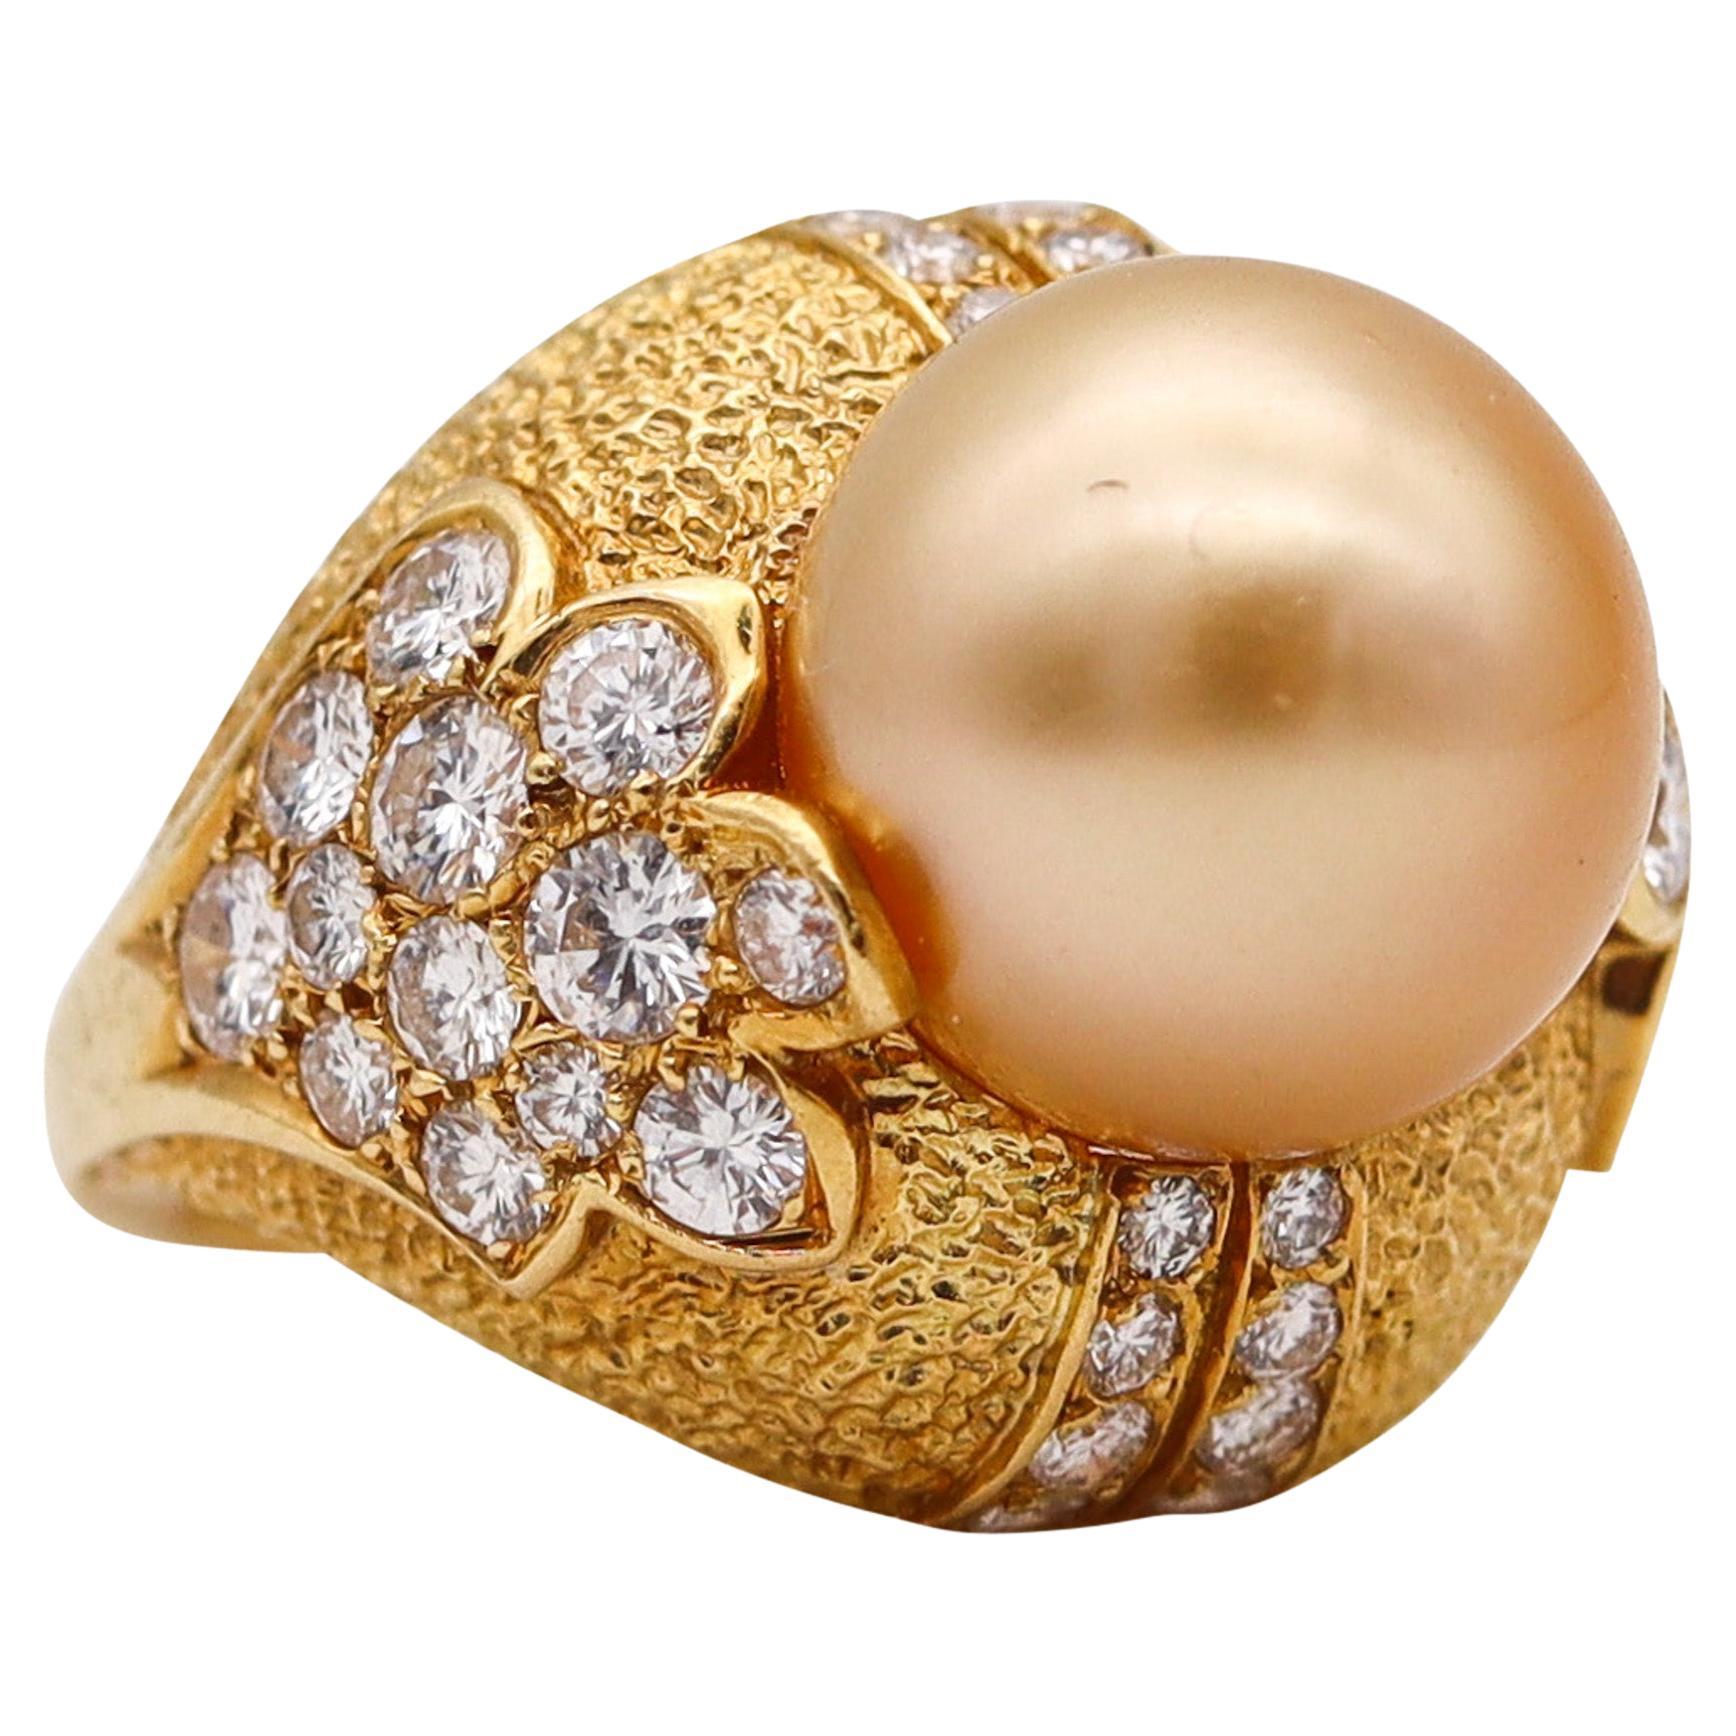 Van Cleef & Arpels Golden Pearl Cocktail Ring 18Kt Gold With 3.46 Ctw Diamonds For Sale